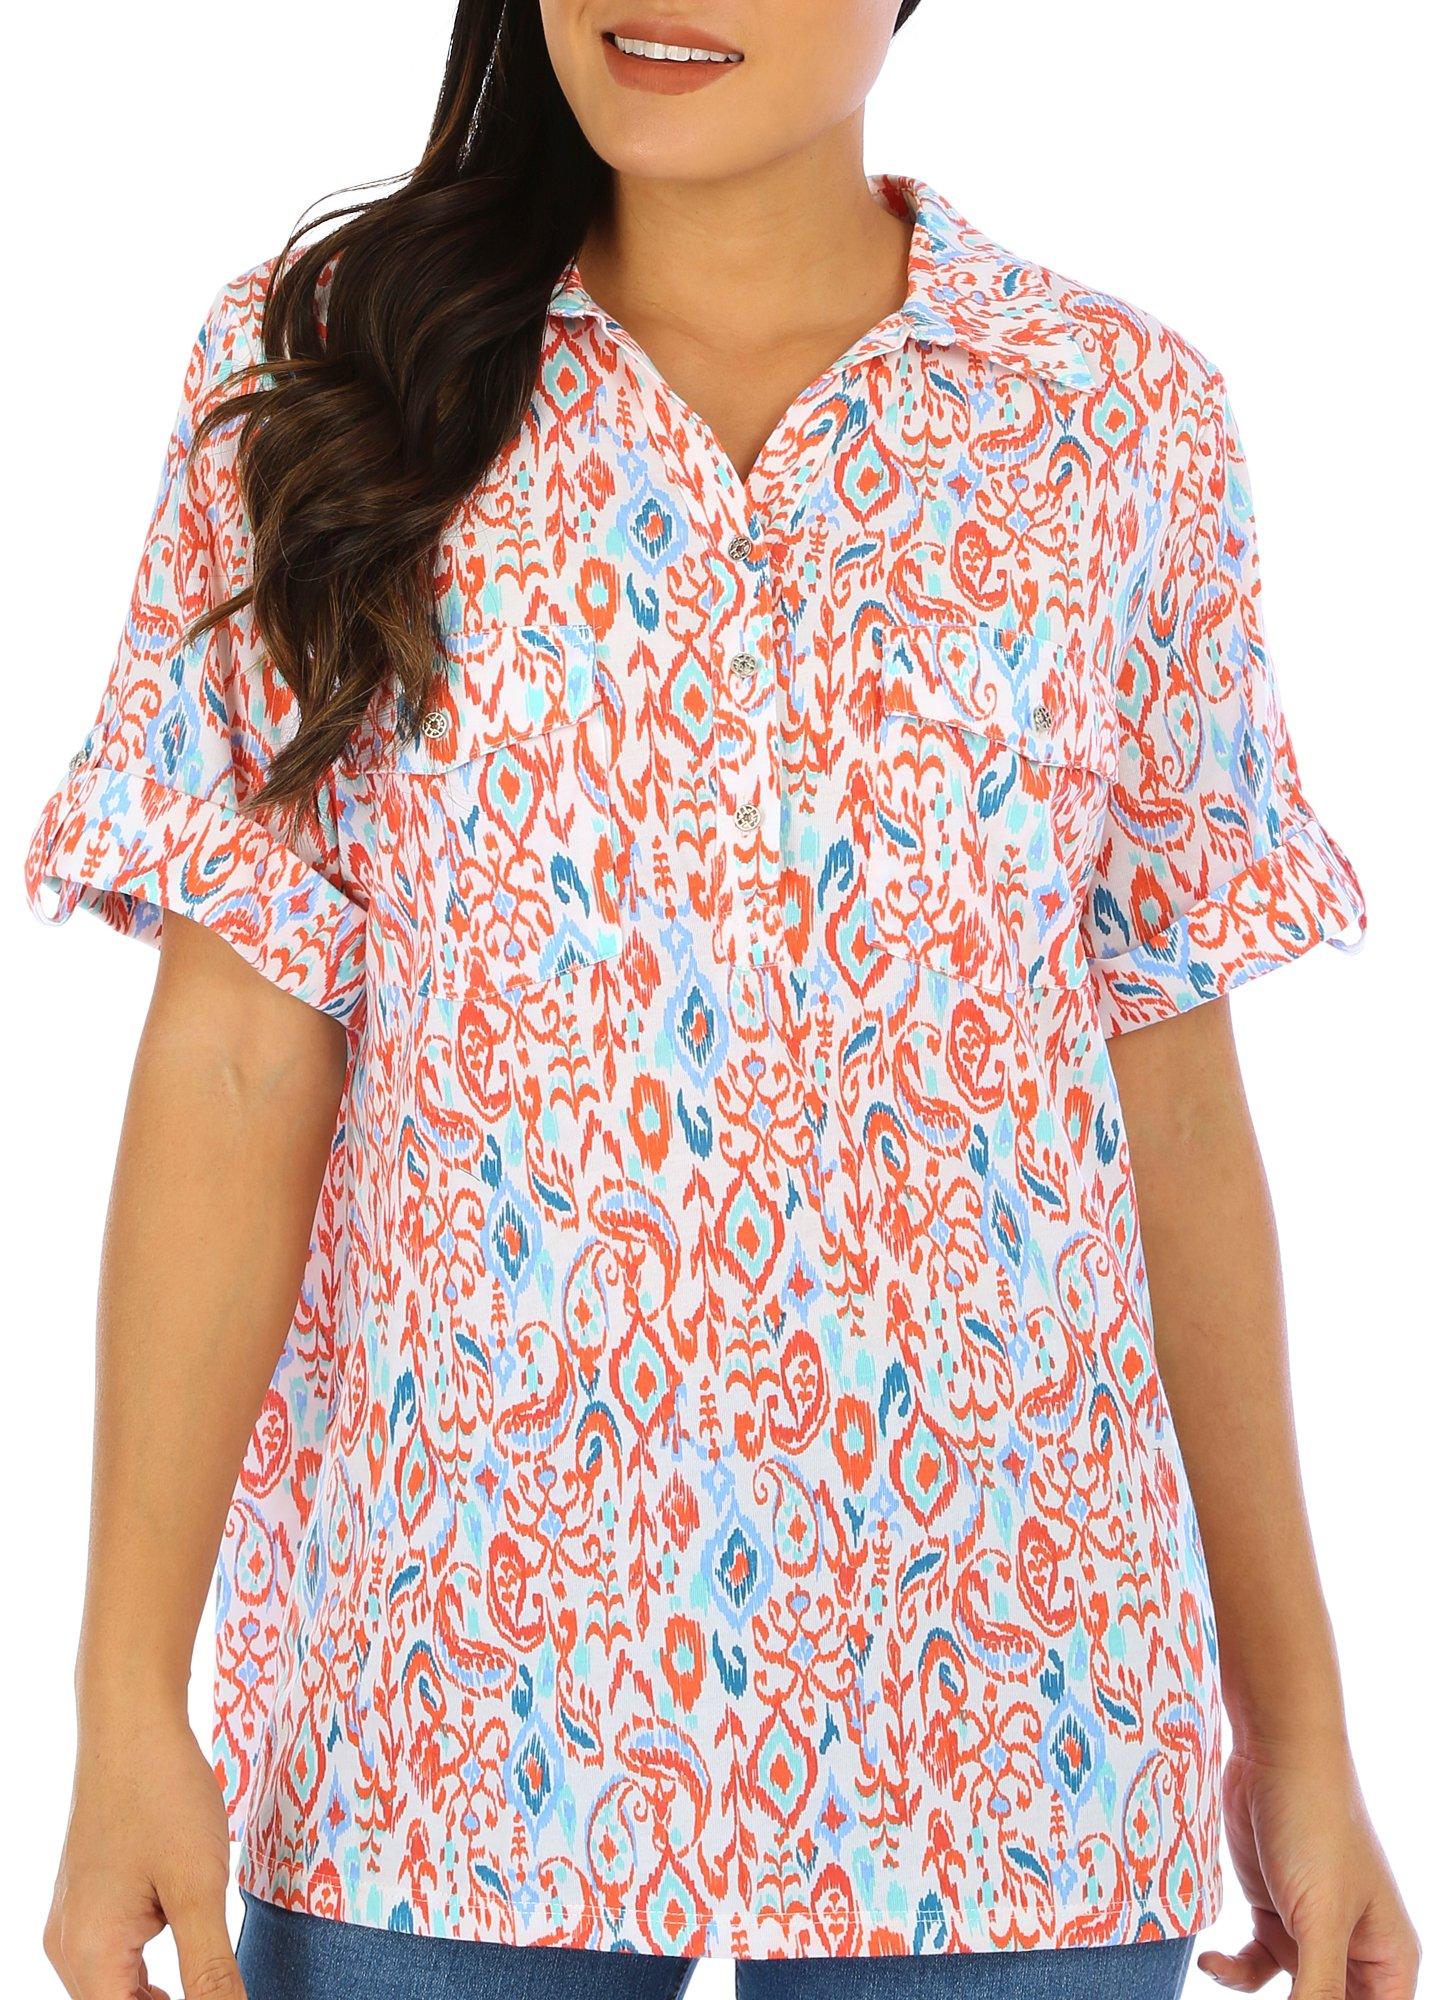 Coral Bay Petite Print Roll Tab Short Sleeve Jersey Polo